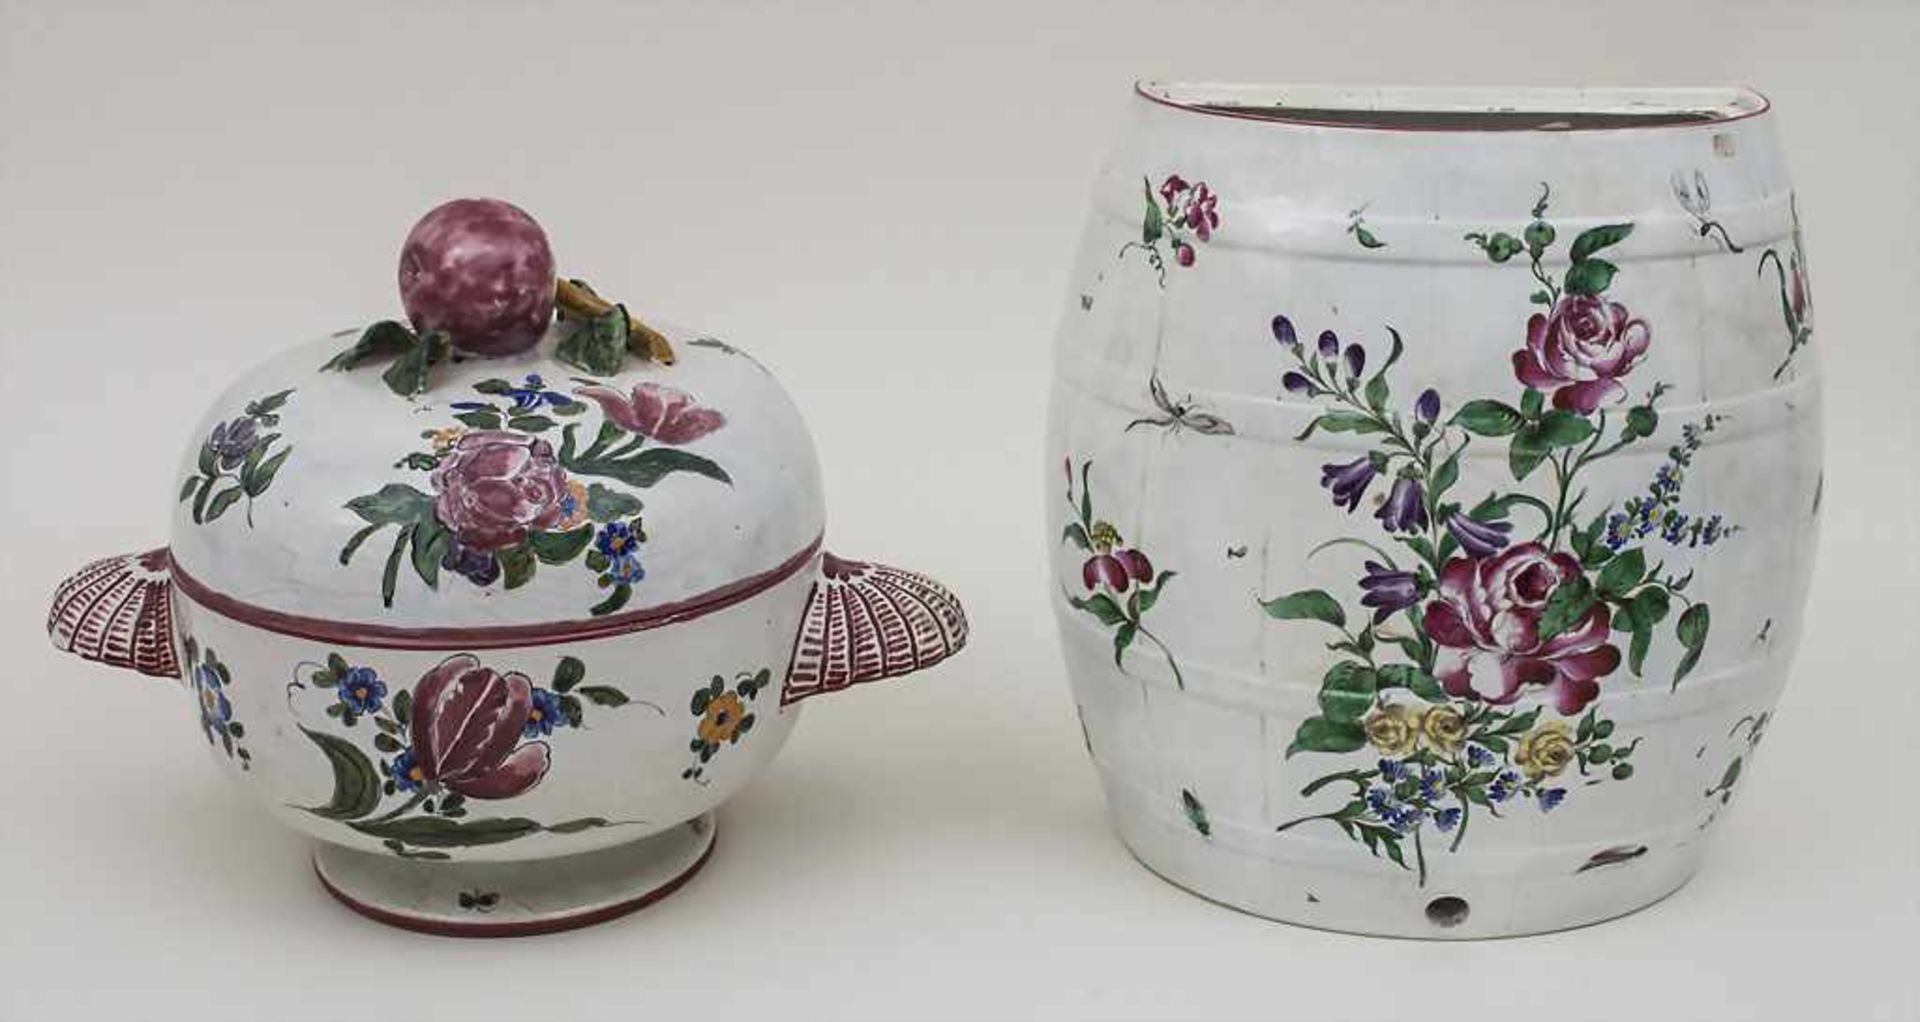 Lavabo und Deckelterrine / A lavabo and a tureen, wohl Frankreich, 19. Jh. Material: Fayence,